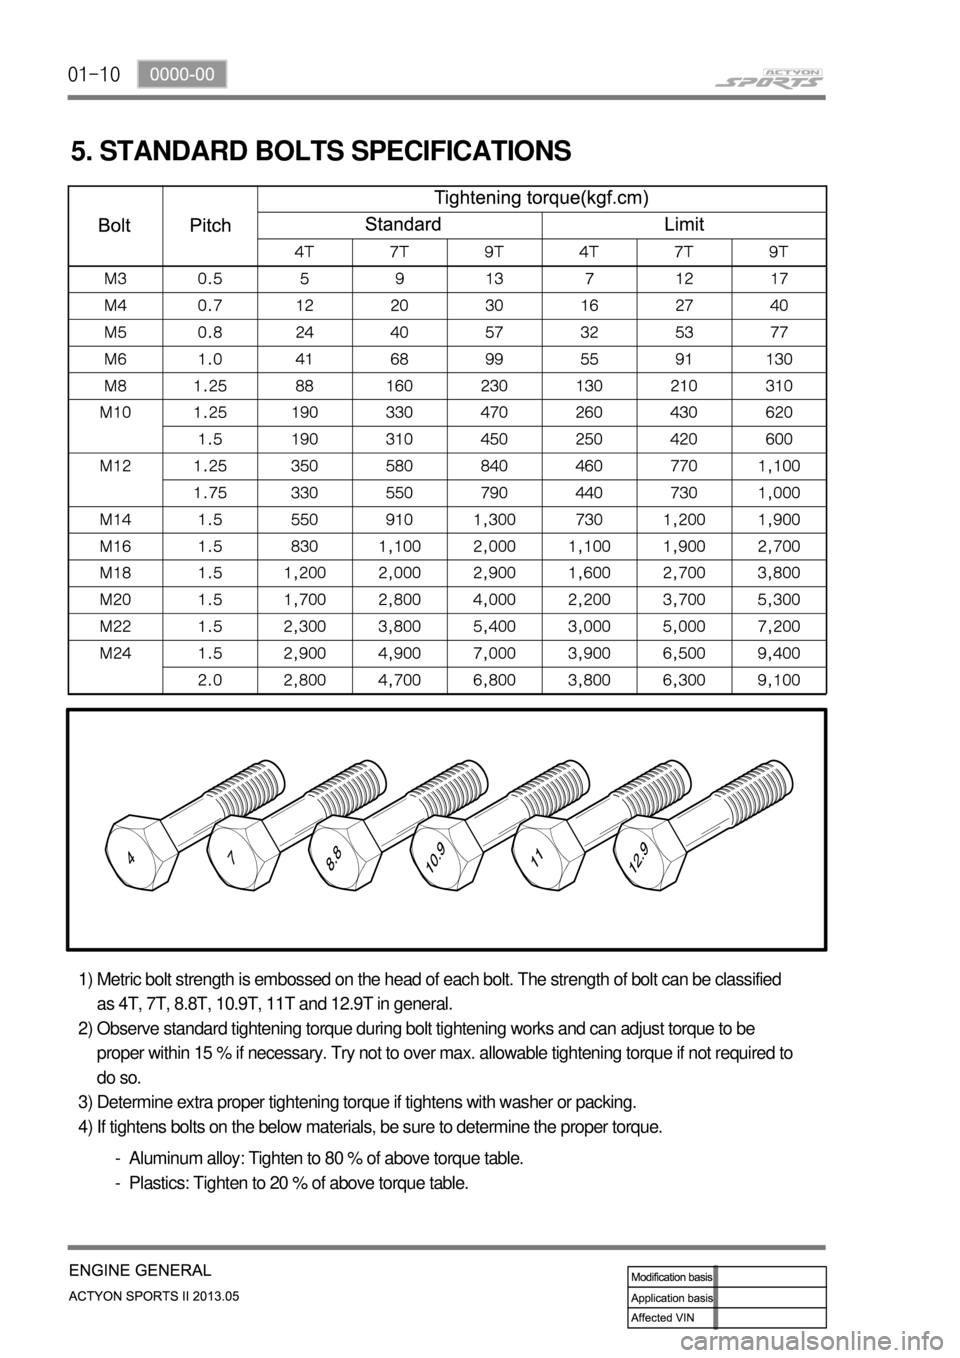 SSANGYONG NEW ACTYON SPORTS 2013  Service Manual 01-10
5. STANDARD BOLTS SPECIFICATIONS
Metric bolt strength is embossed on the head of each bolt. The strength of bolt can be classified 
as 4T, 7T, 8.8T, 10.9T, 11T and 12.9T in general.
Observe stan